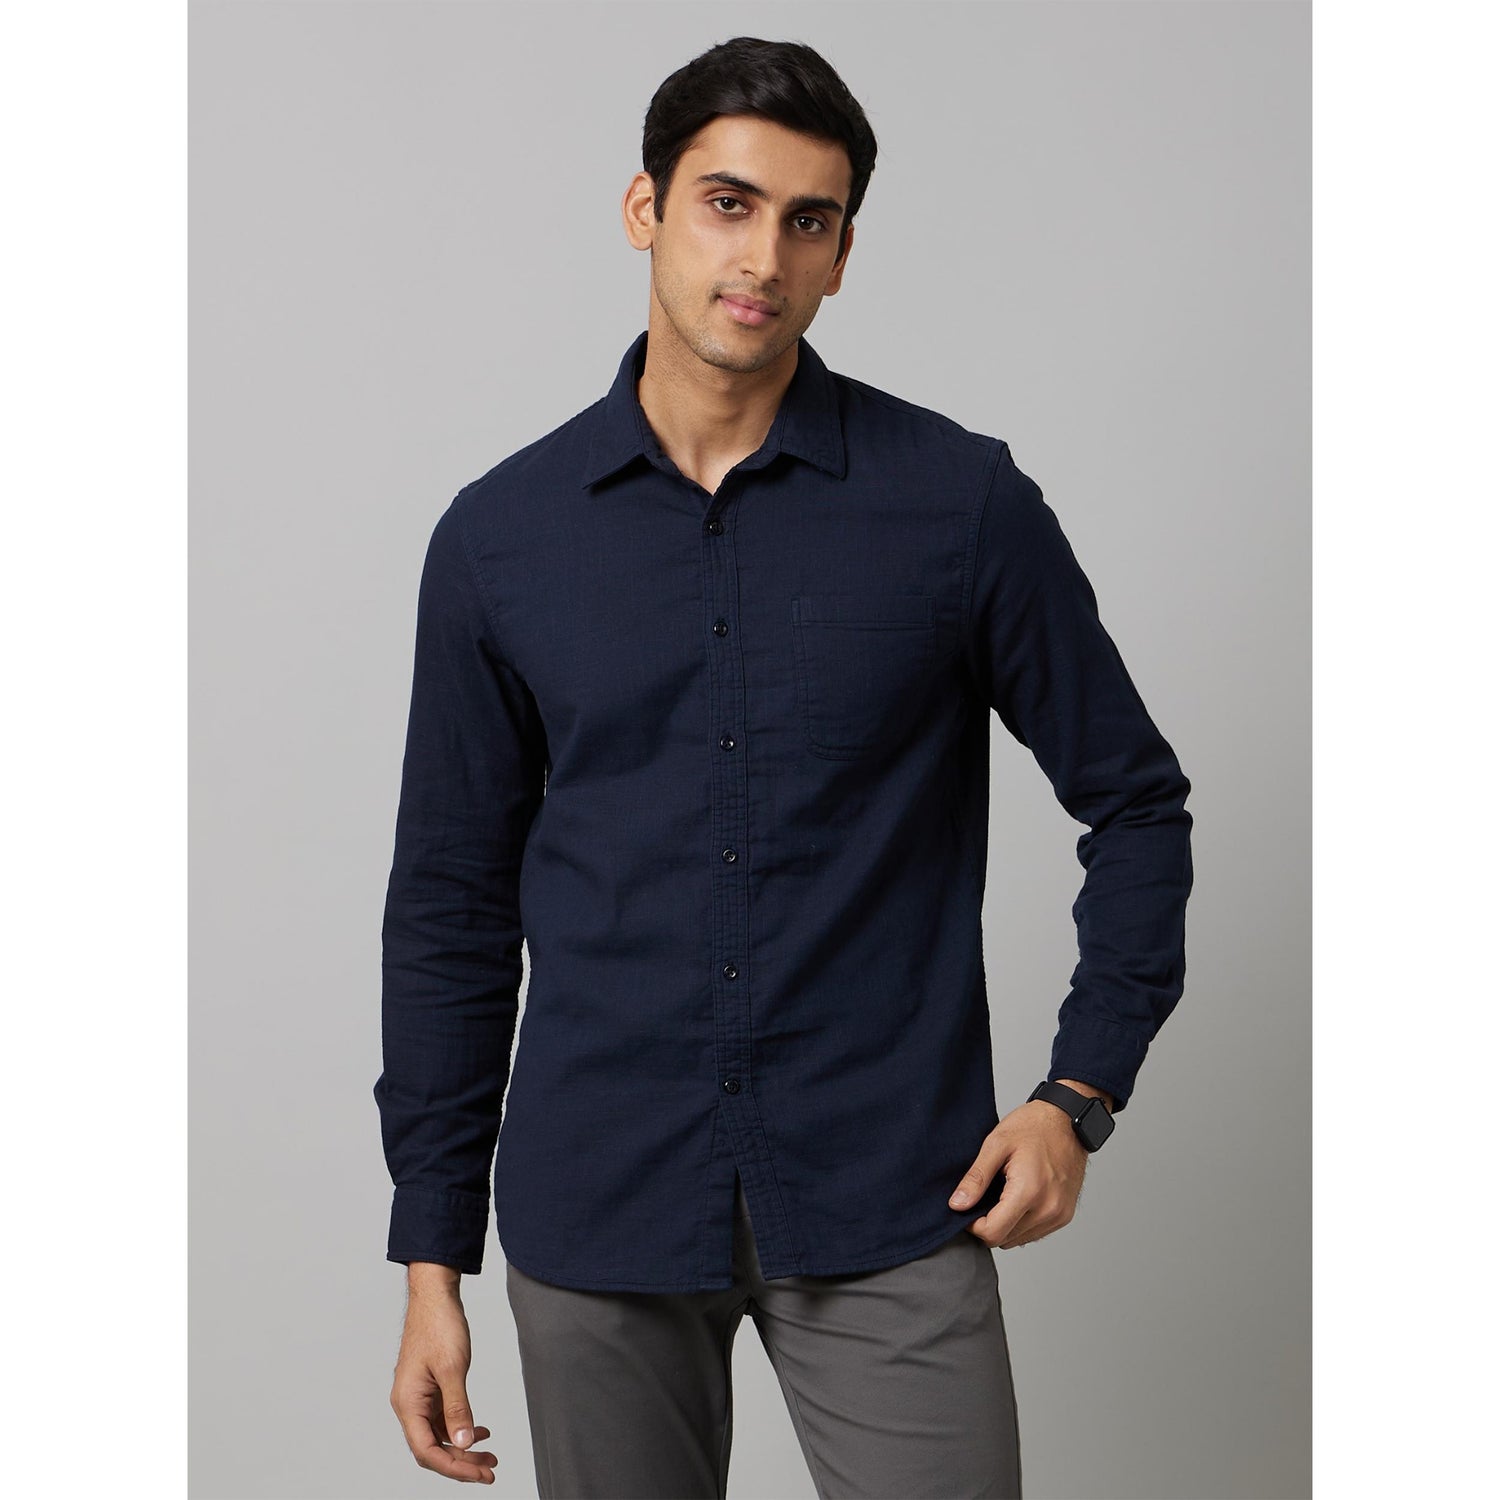 Navy Blue Classic Spread Collar Breathable Relaxed Cotton Casual Shirt (DADOUBLE)